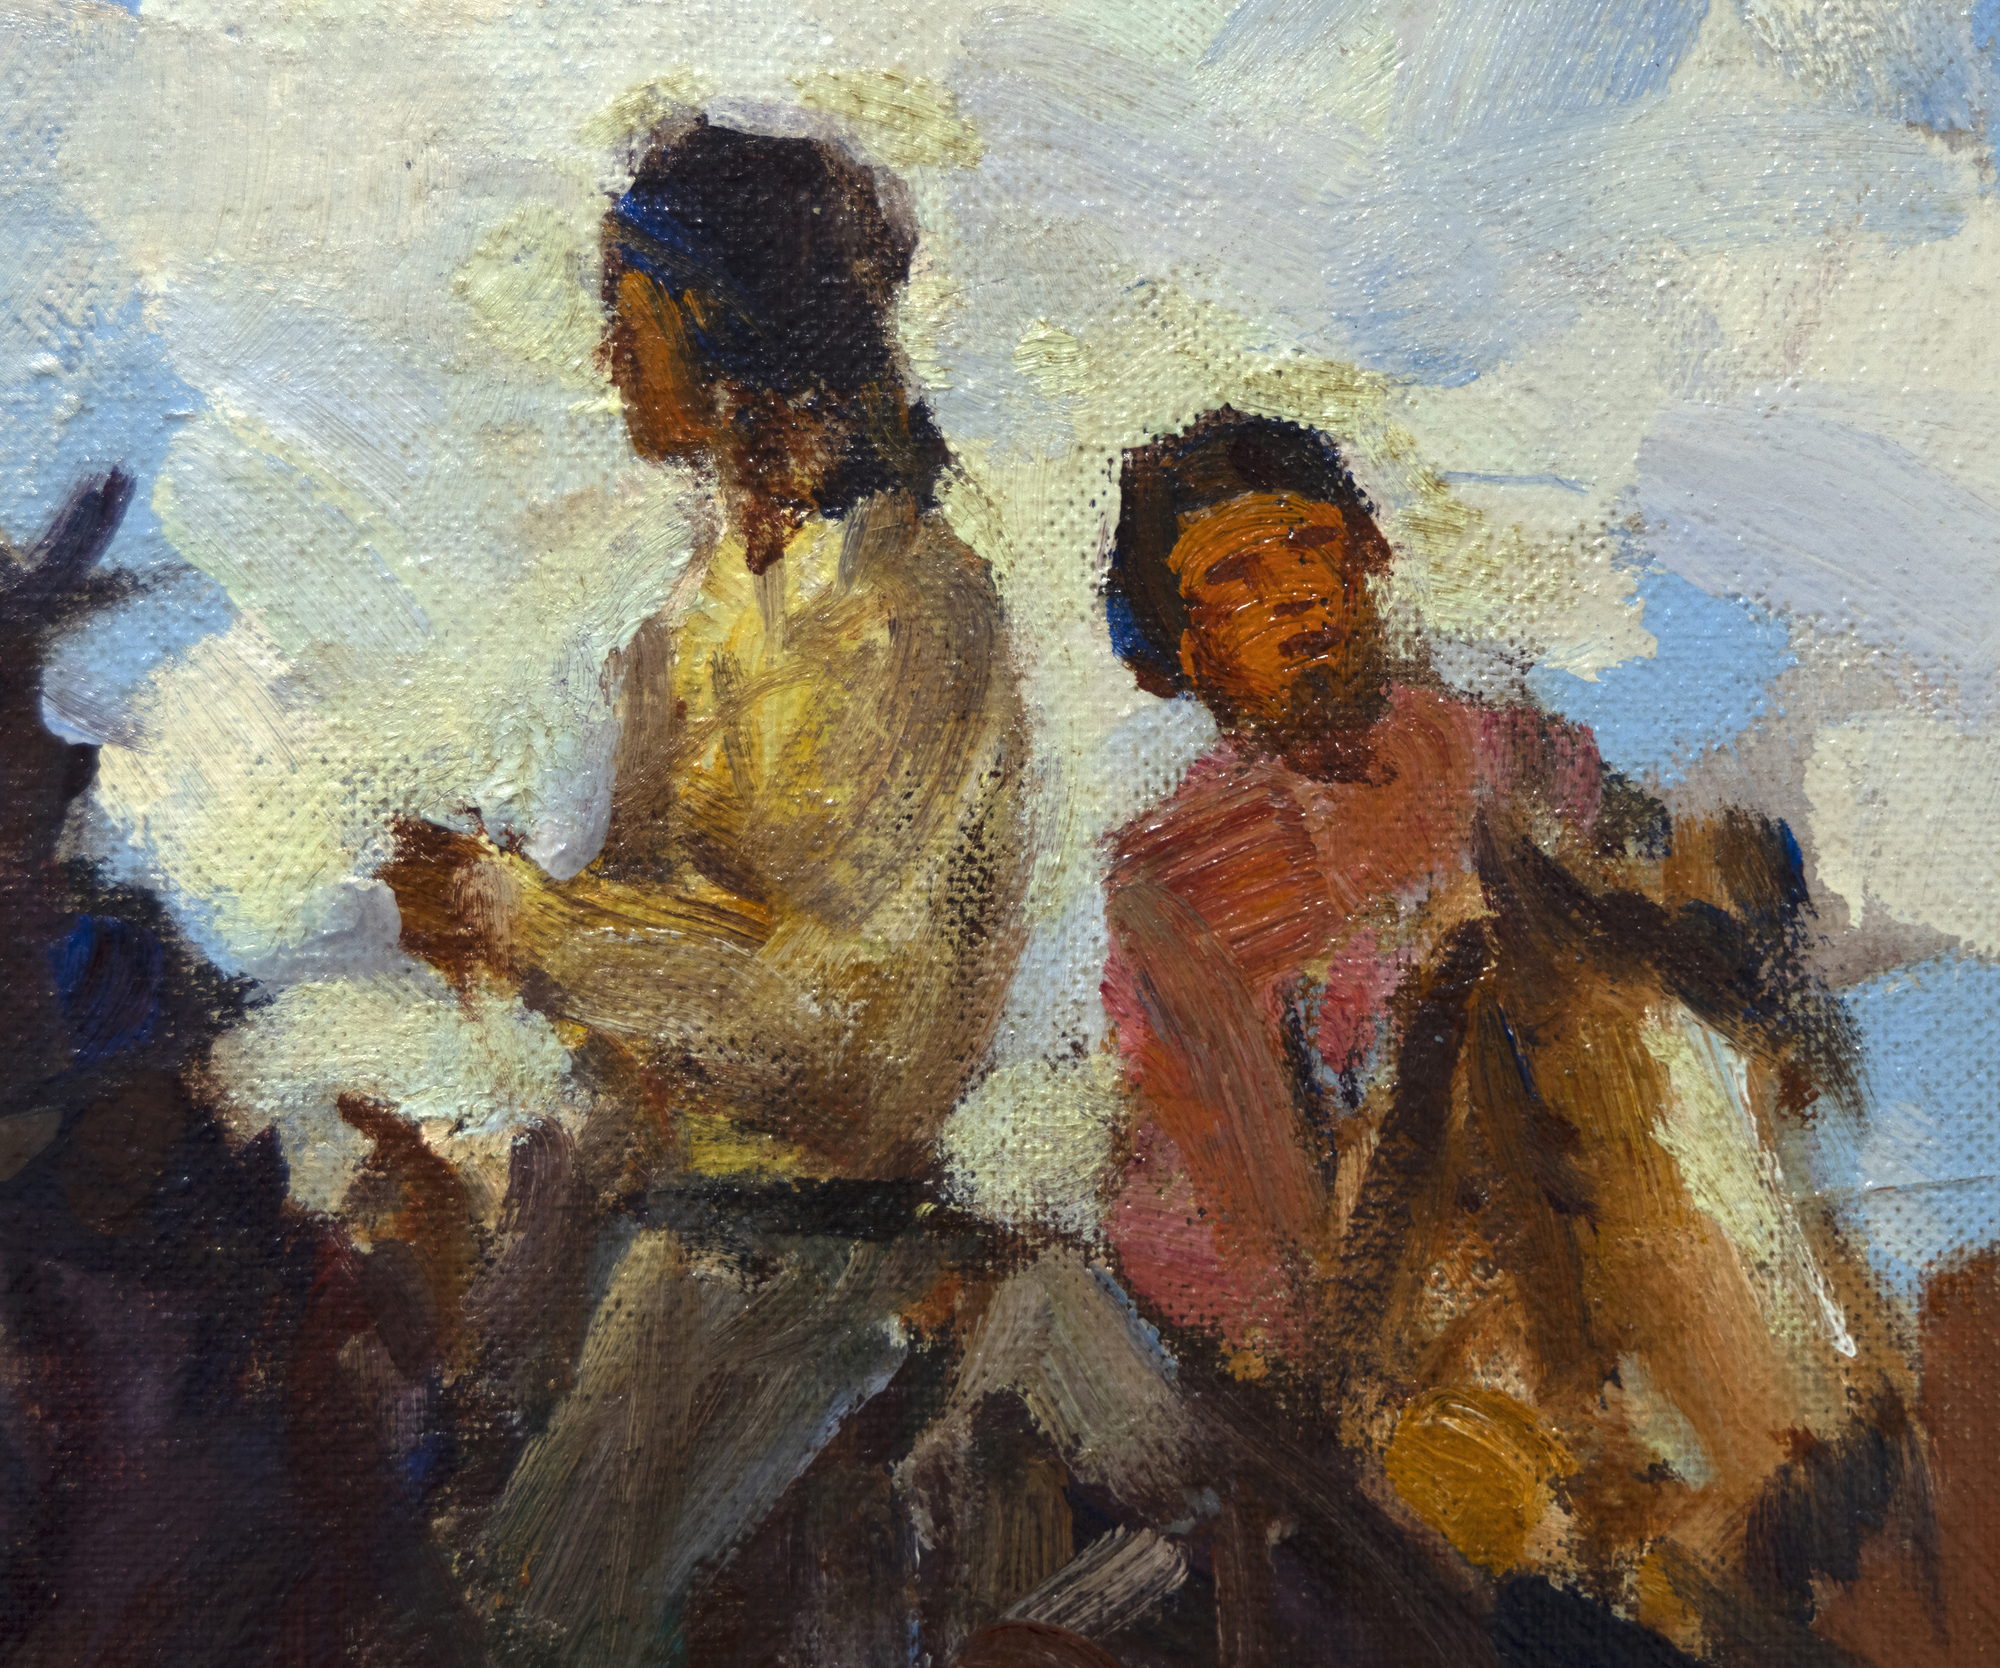 FRANK TENNEY JOHNSON - Scouting - oil on canvas - 13 1/2 x 17 in.